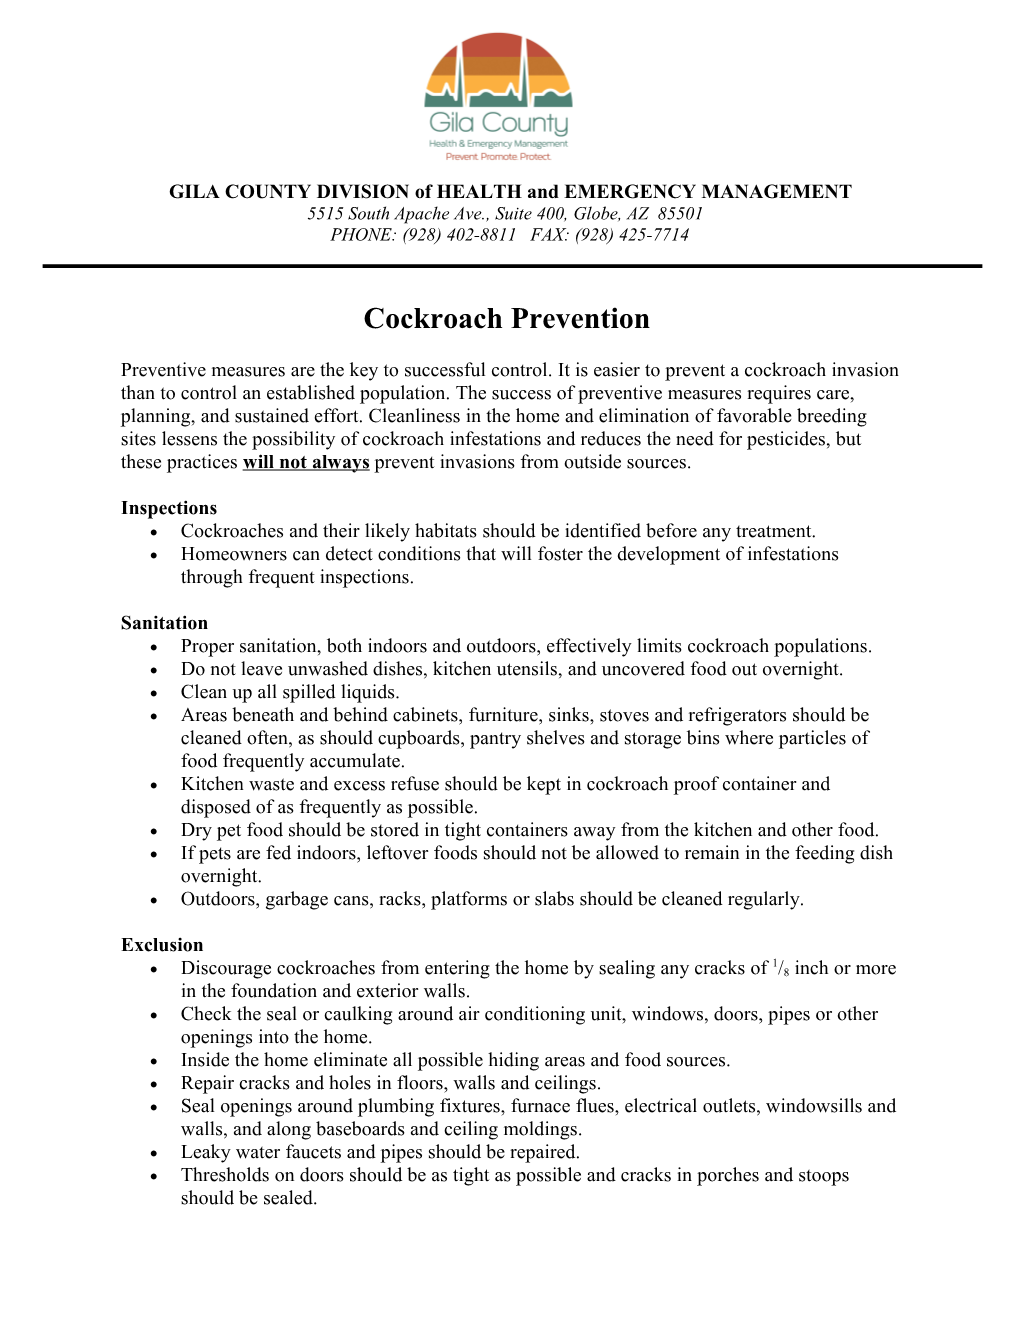 GILA COUNTY DIVISION of HEALTH and EMERGENCY MANAGEMENT